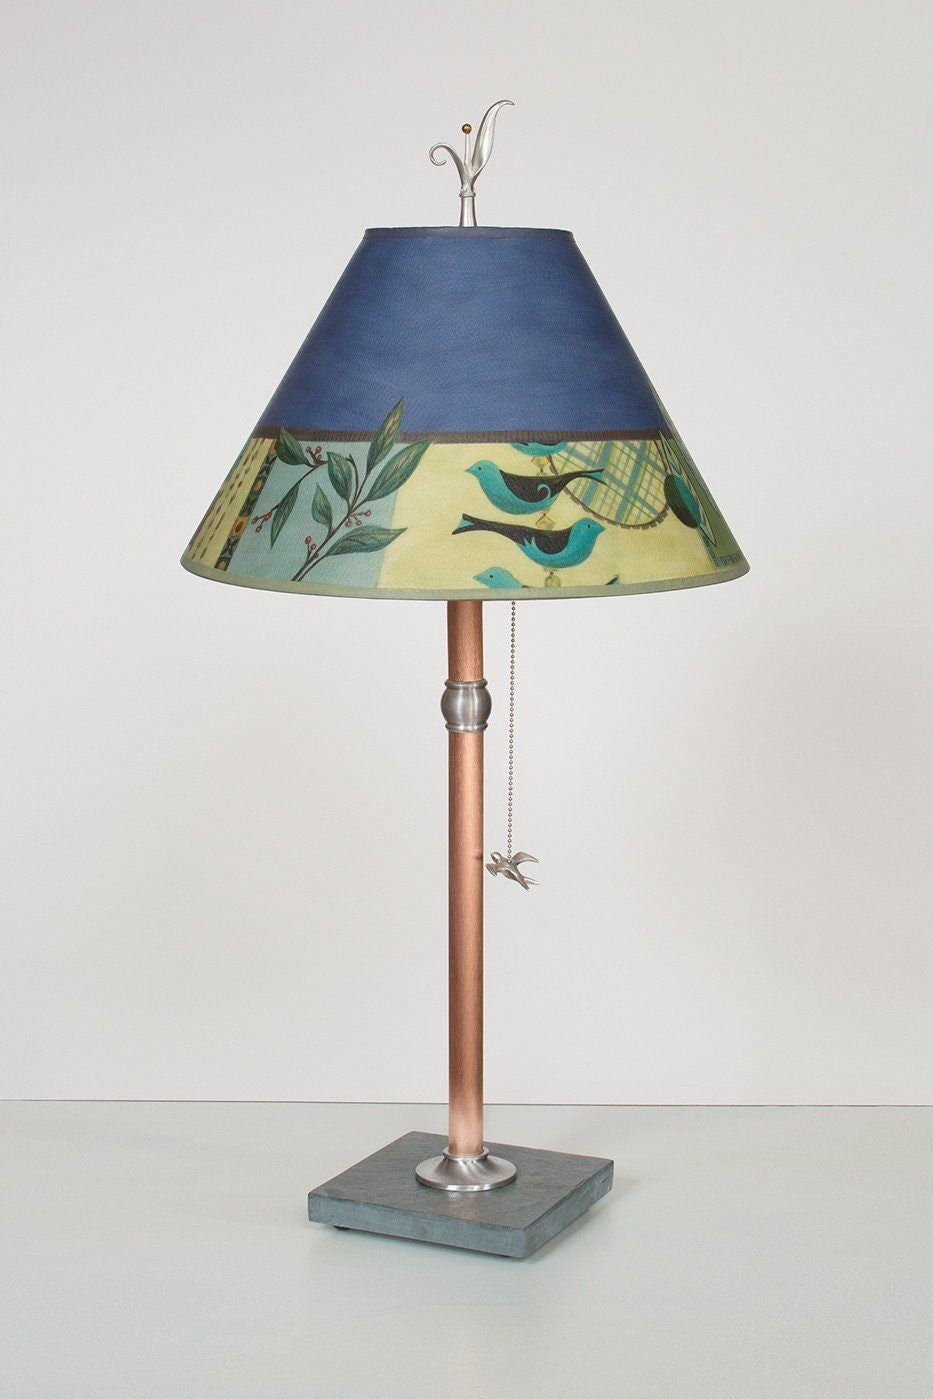 Janna Ugone & Co Table Lamps Copper Table Lamp with Medium Conical Shade in New Capri Periwinkle